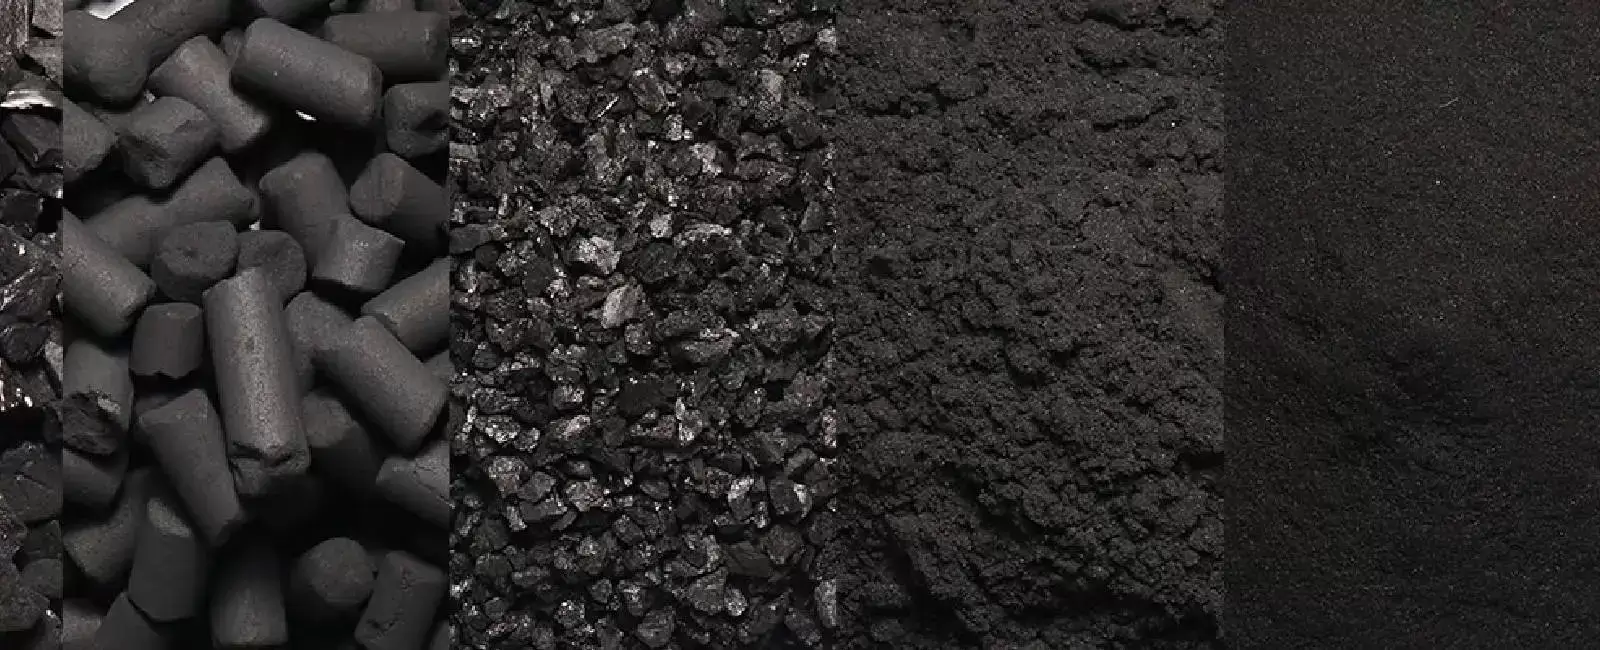 Different types of activated carbon